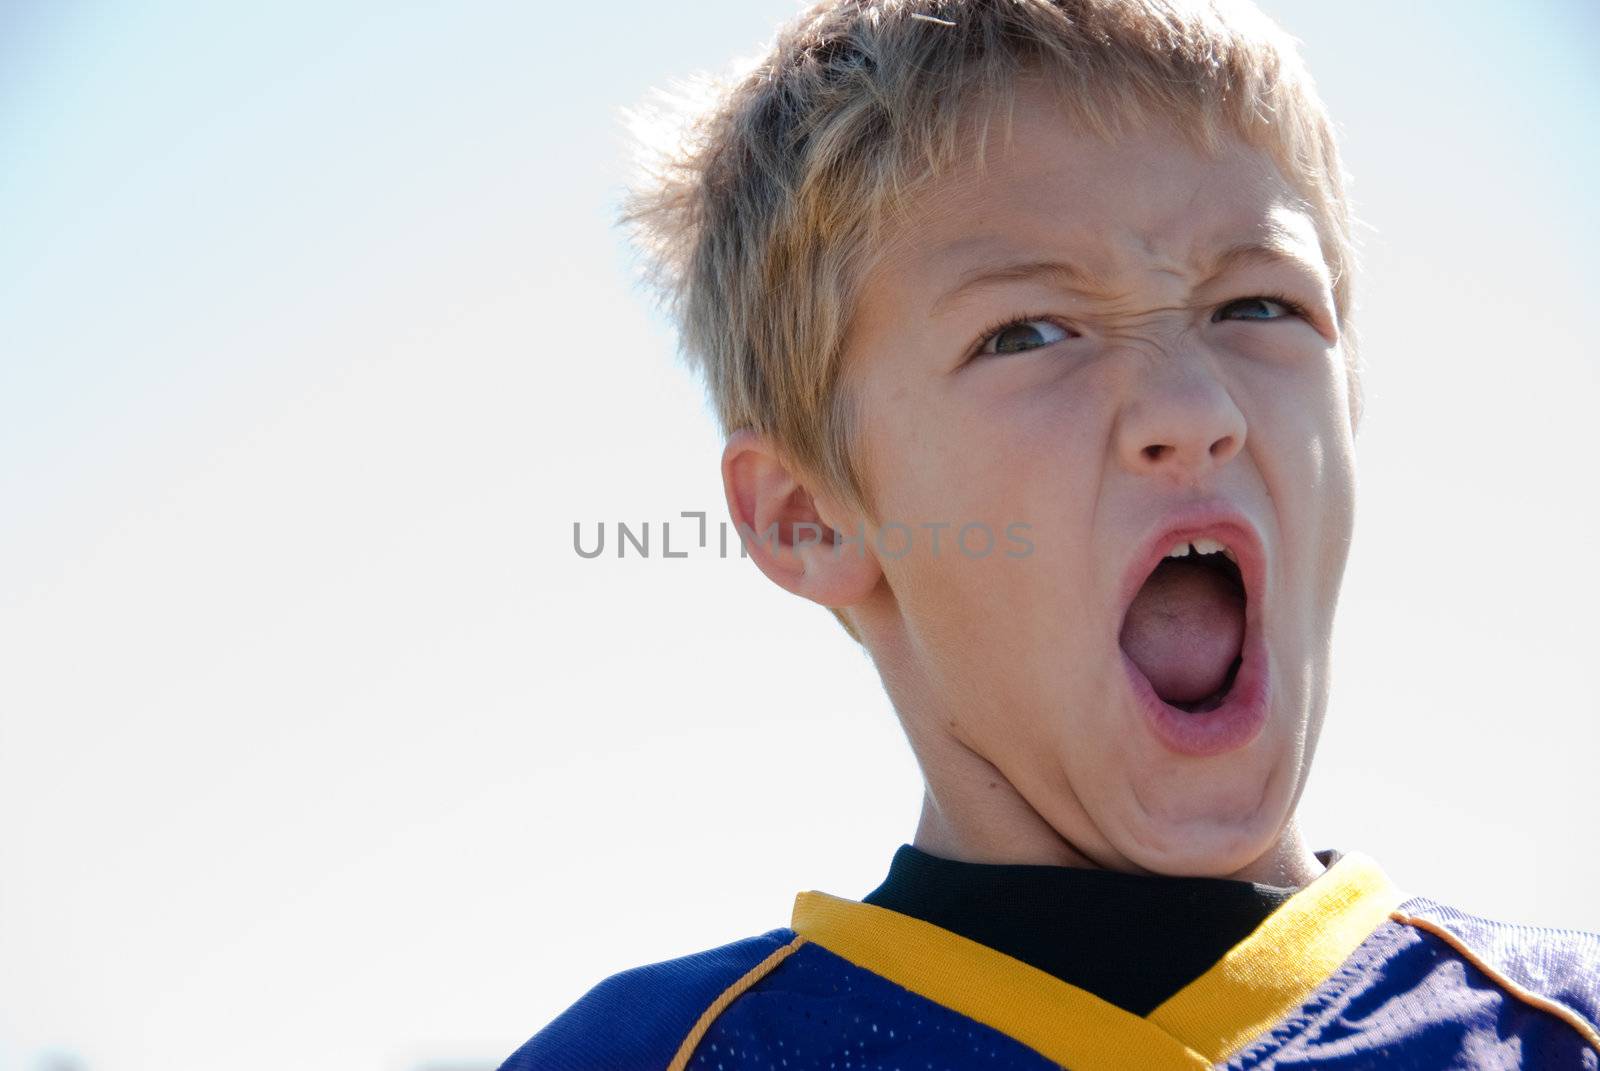 Young boy yelling during the game.